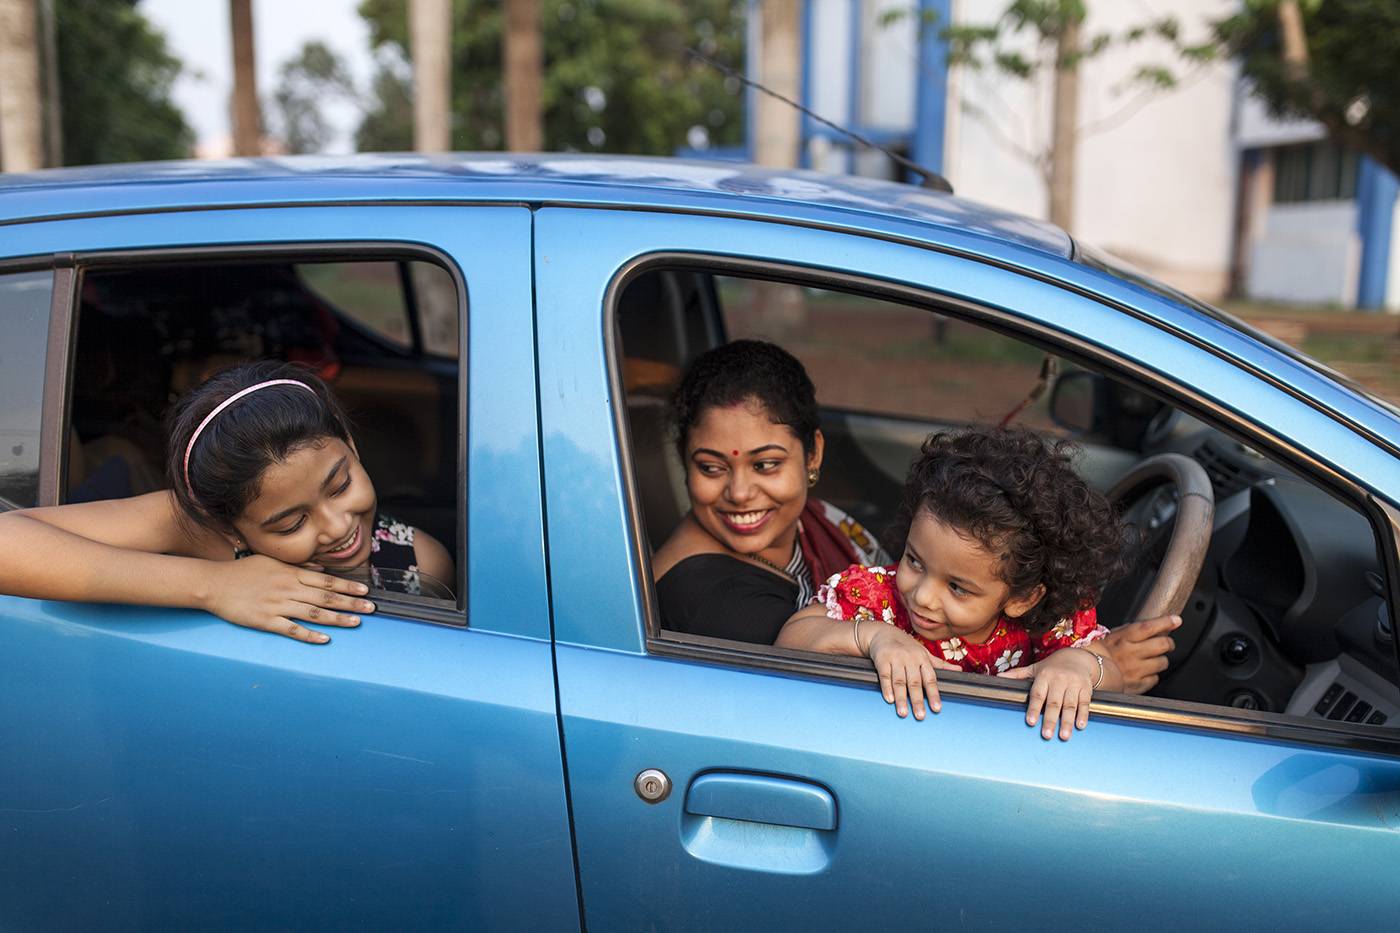 Indian Woman With Ethnic Sari Dress Sit Inside A Car With Two Girls